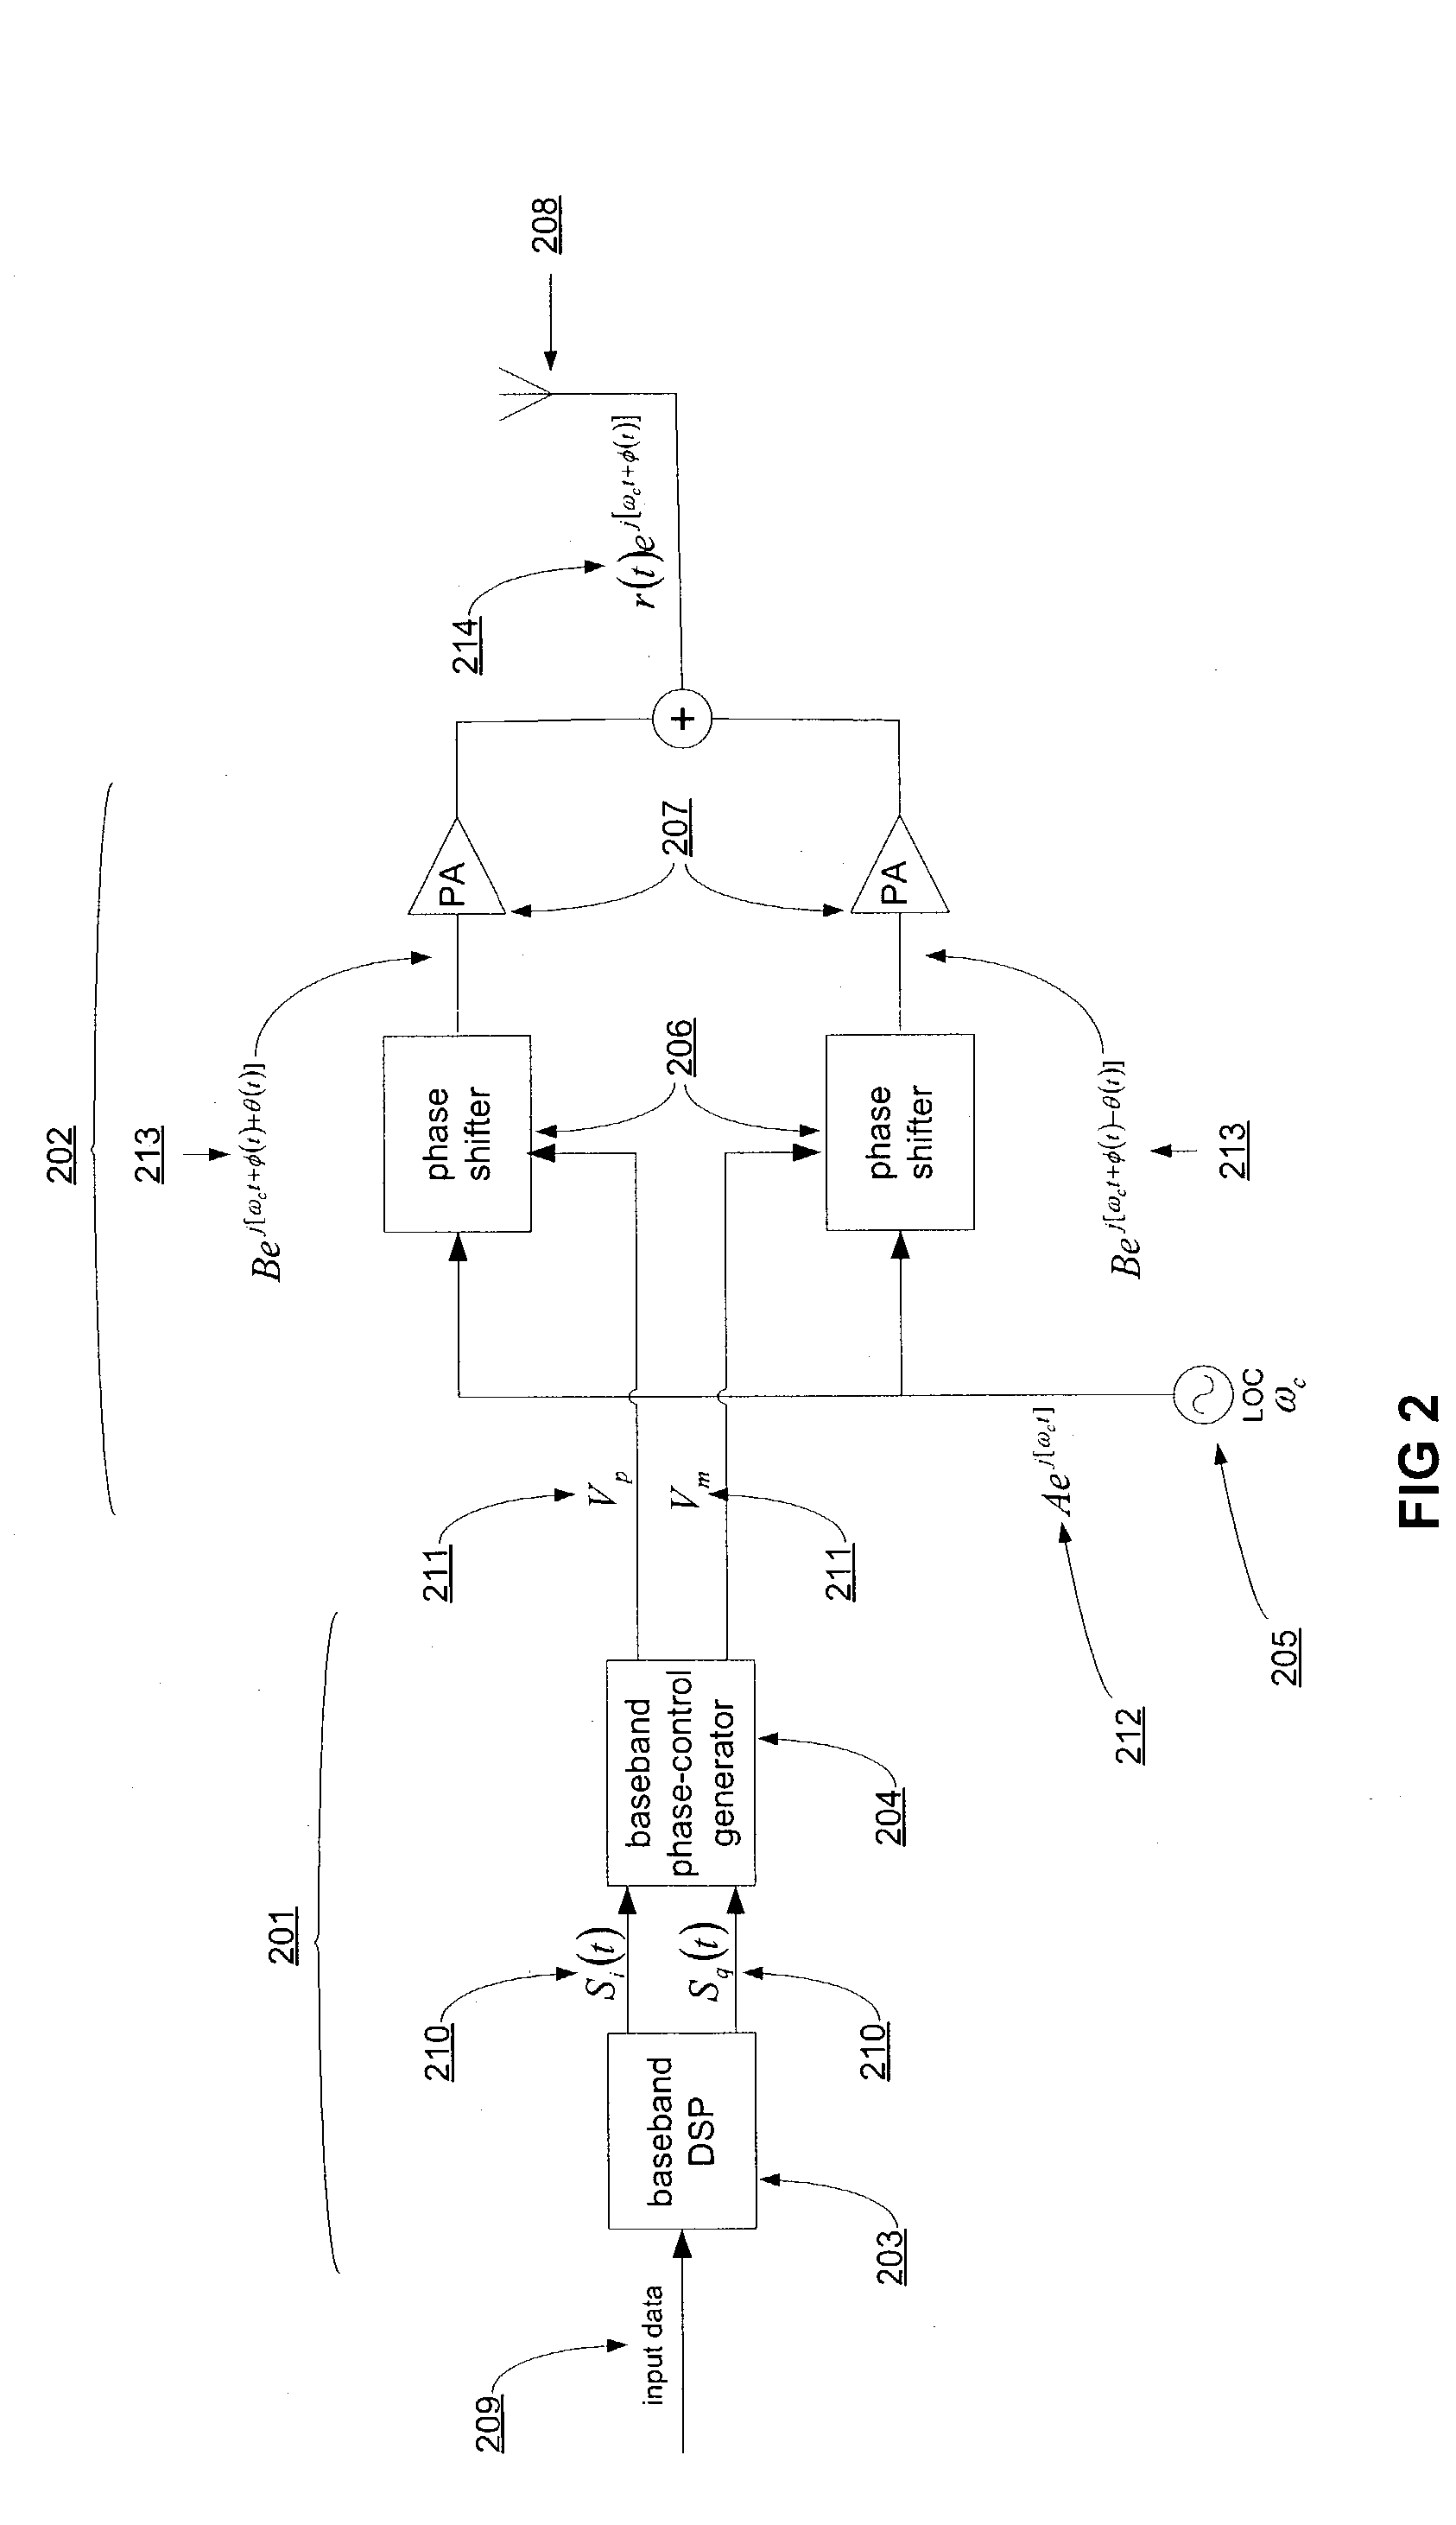 Phase shifted transmitter architecture for communication systems